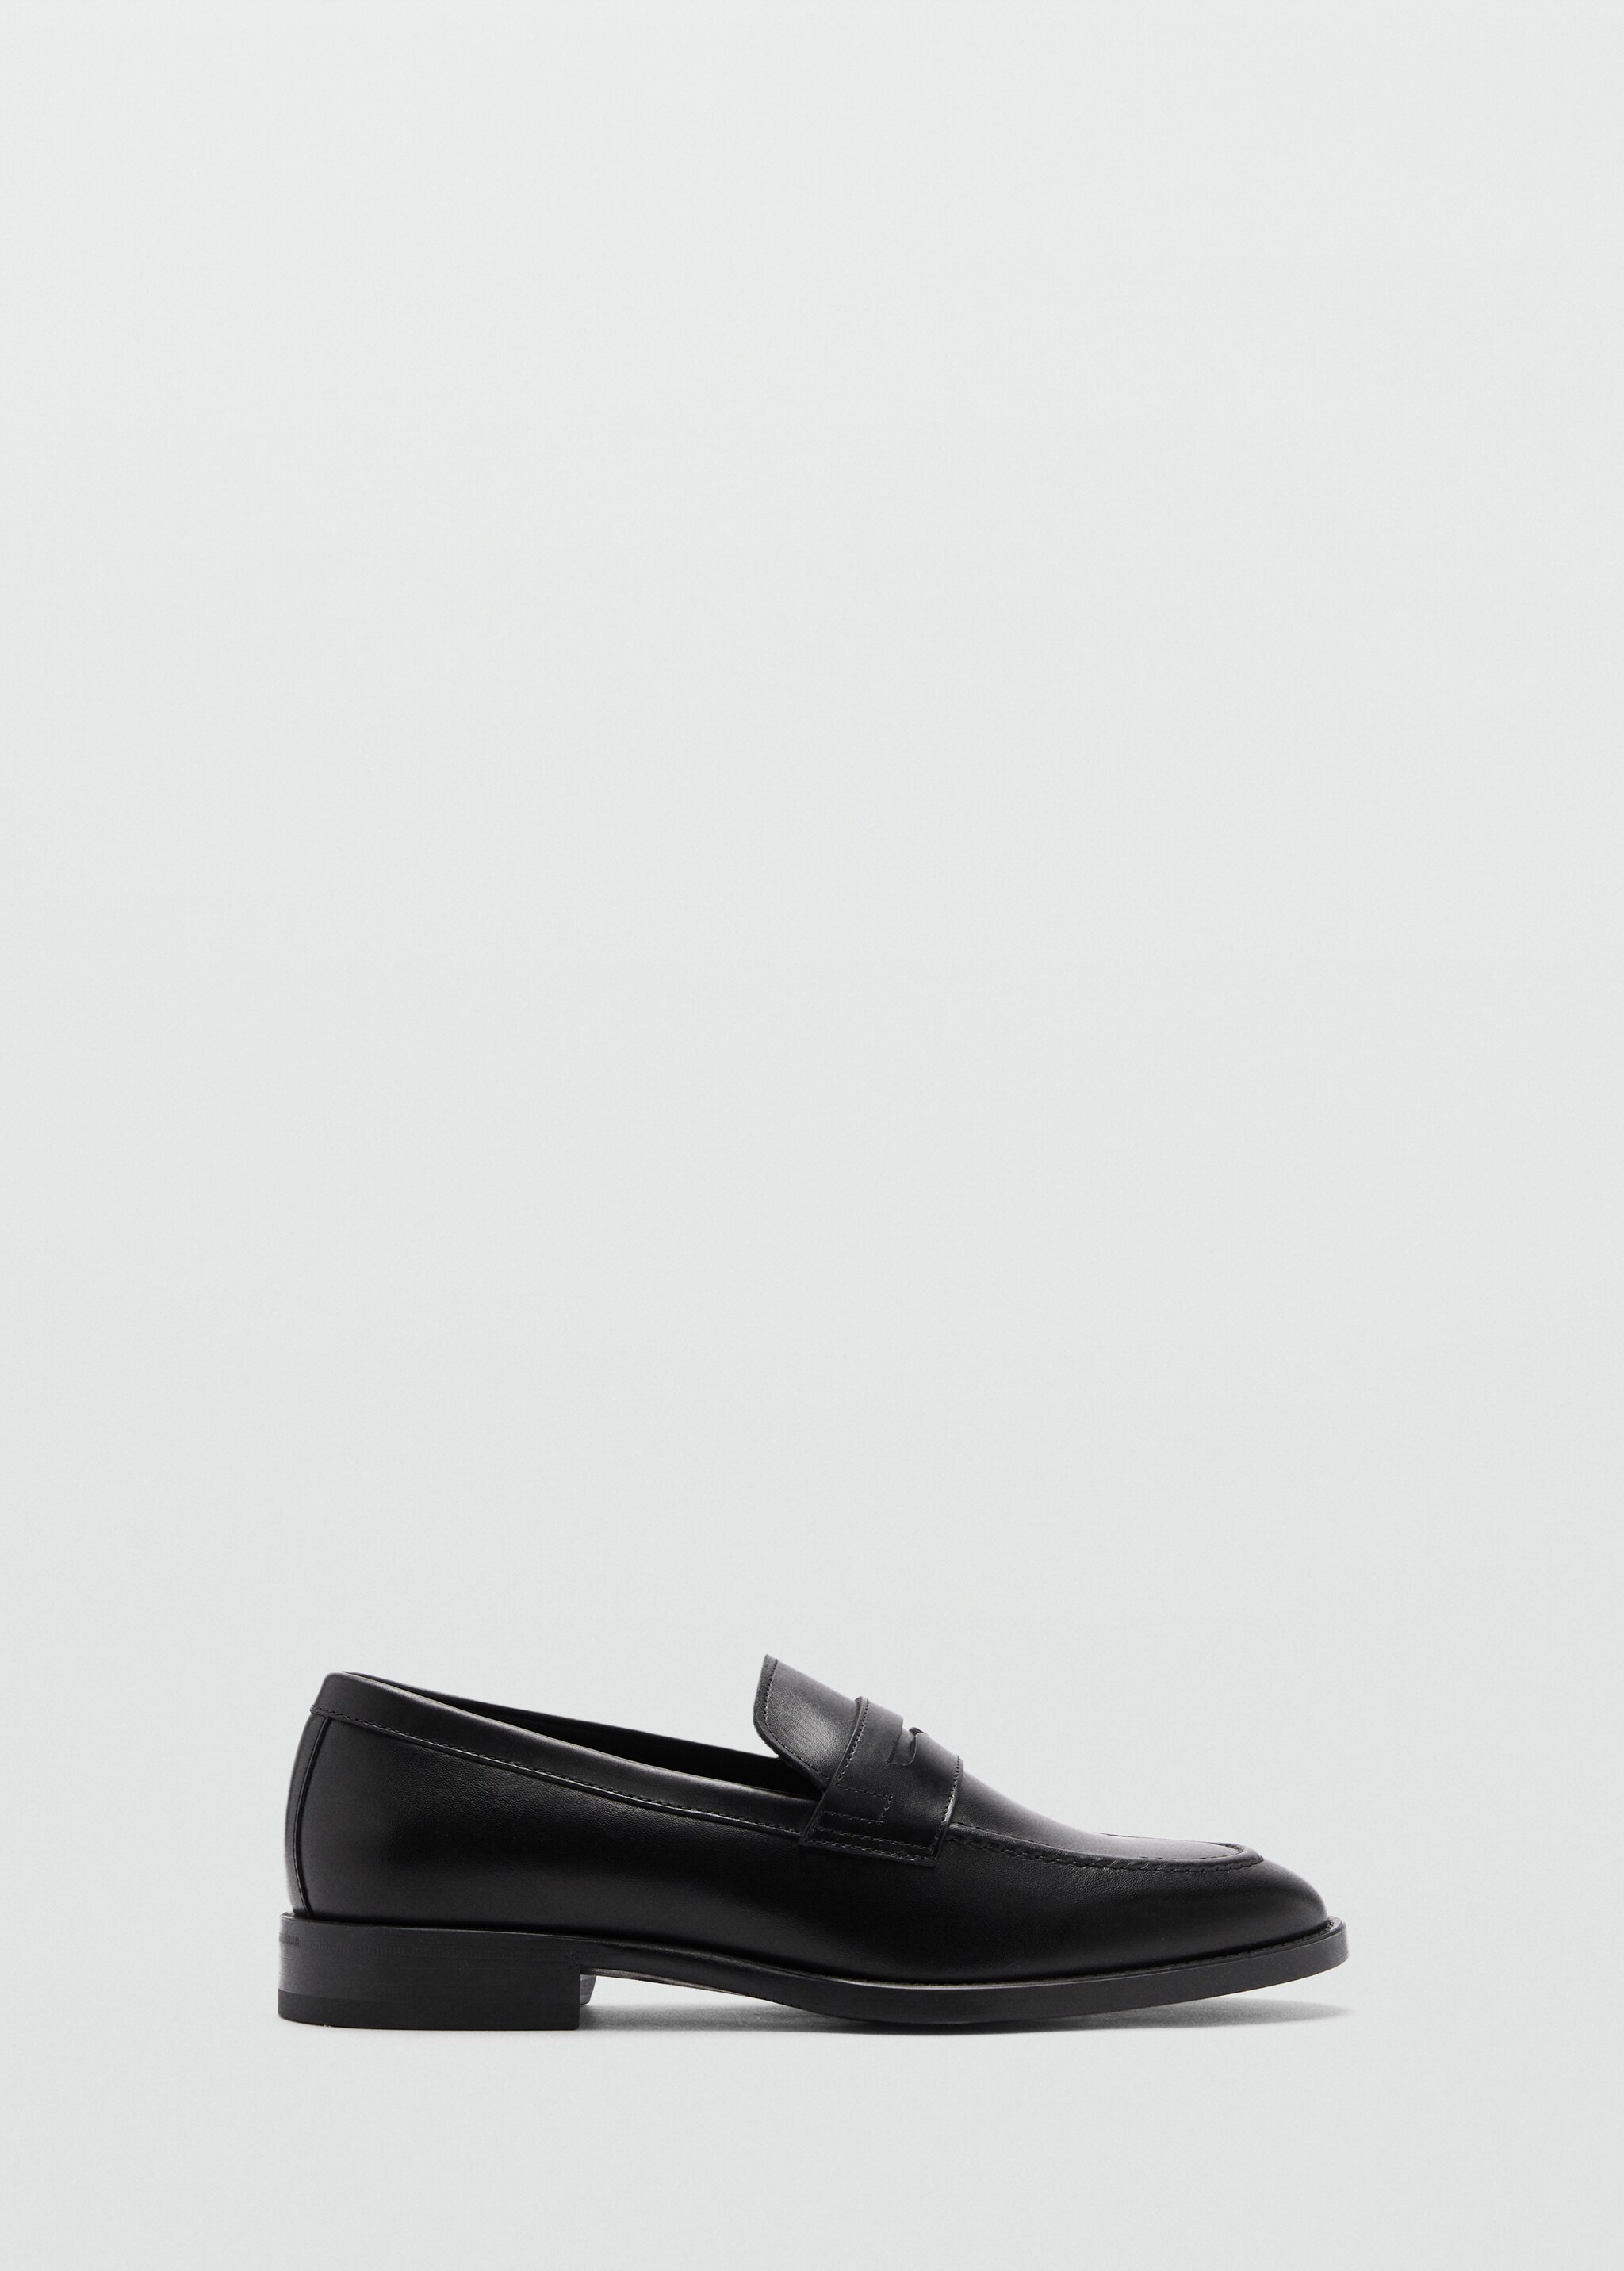 Aged-leather loafers - Article without model